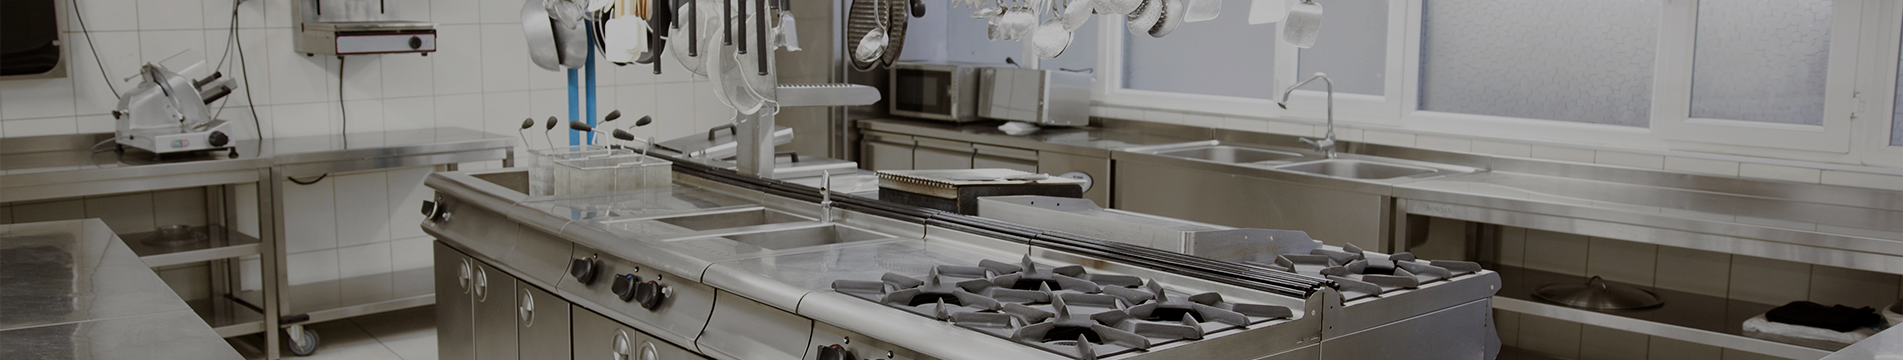 food preparation equipments and their uses,food preparation tools and equipments,restaurant food preparation equipment,tools equipment used during food preparation,equipment used in food preparation